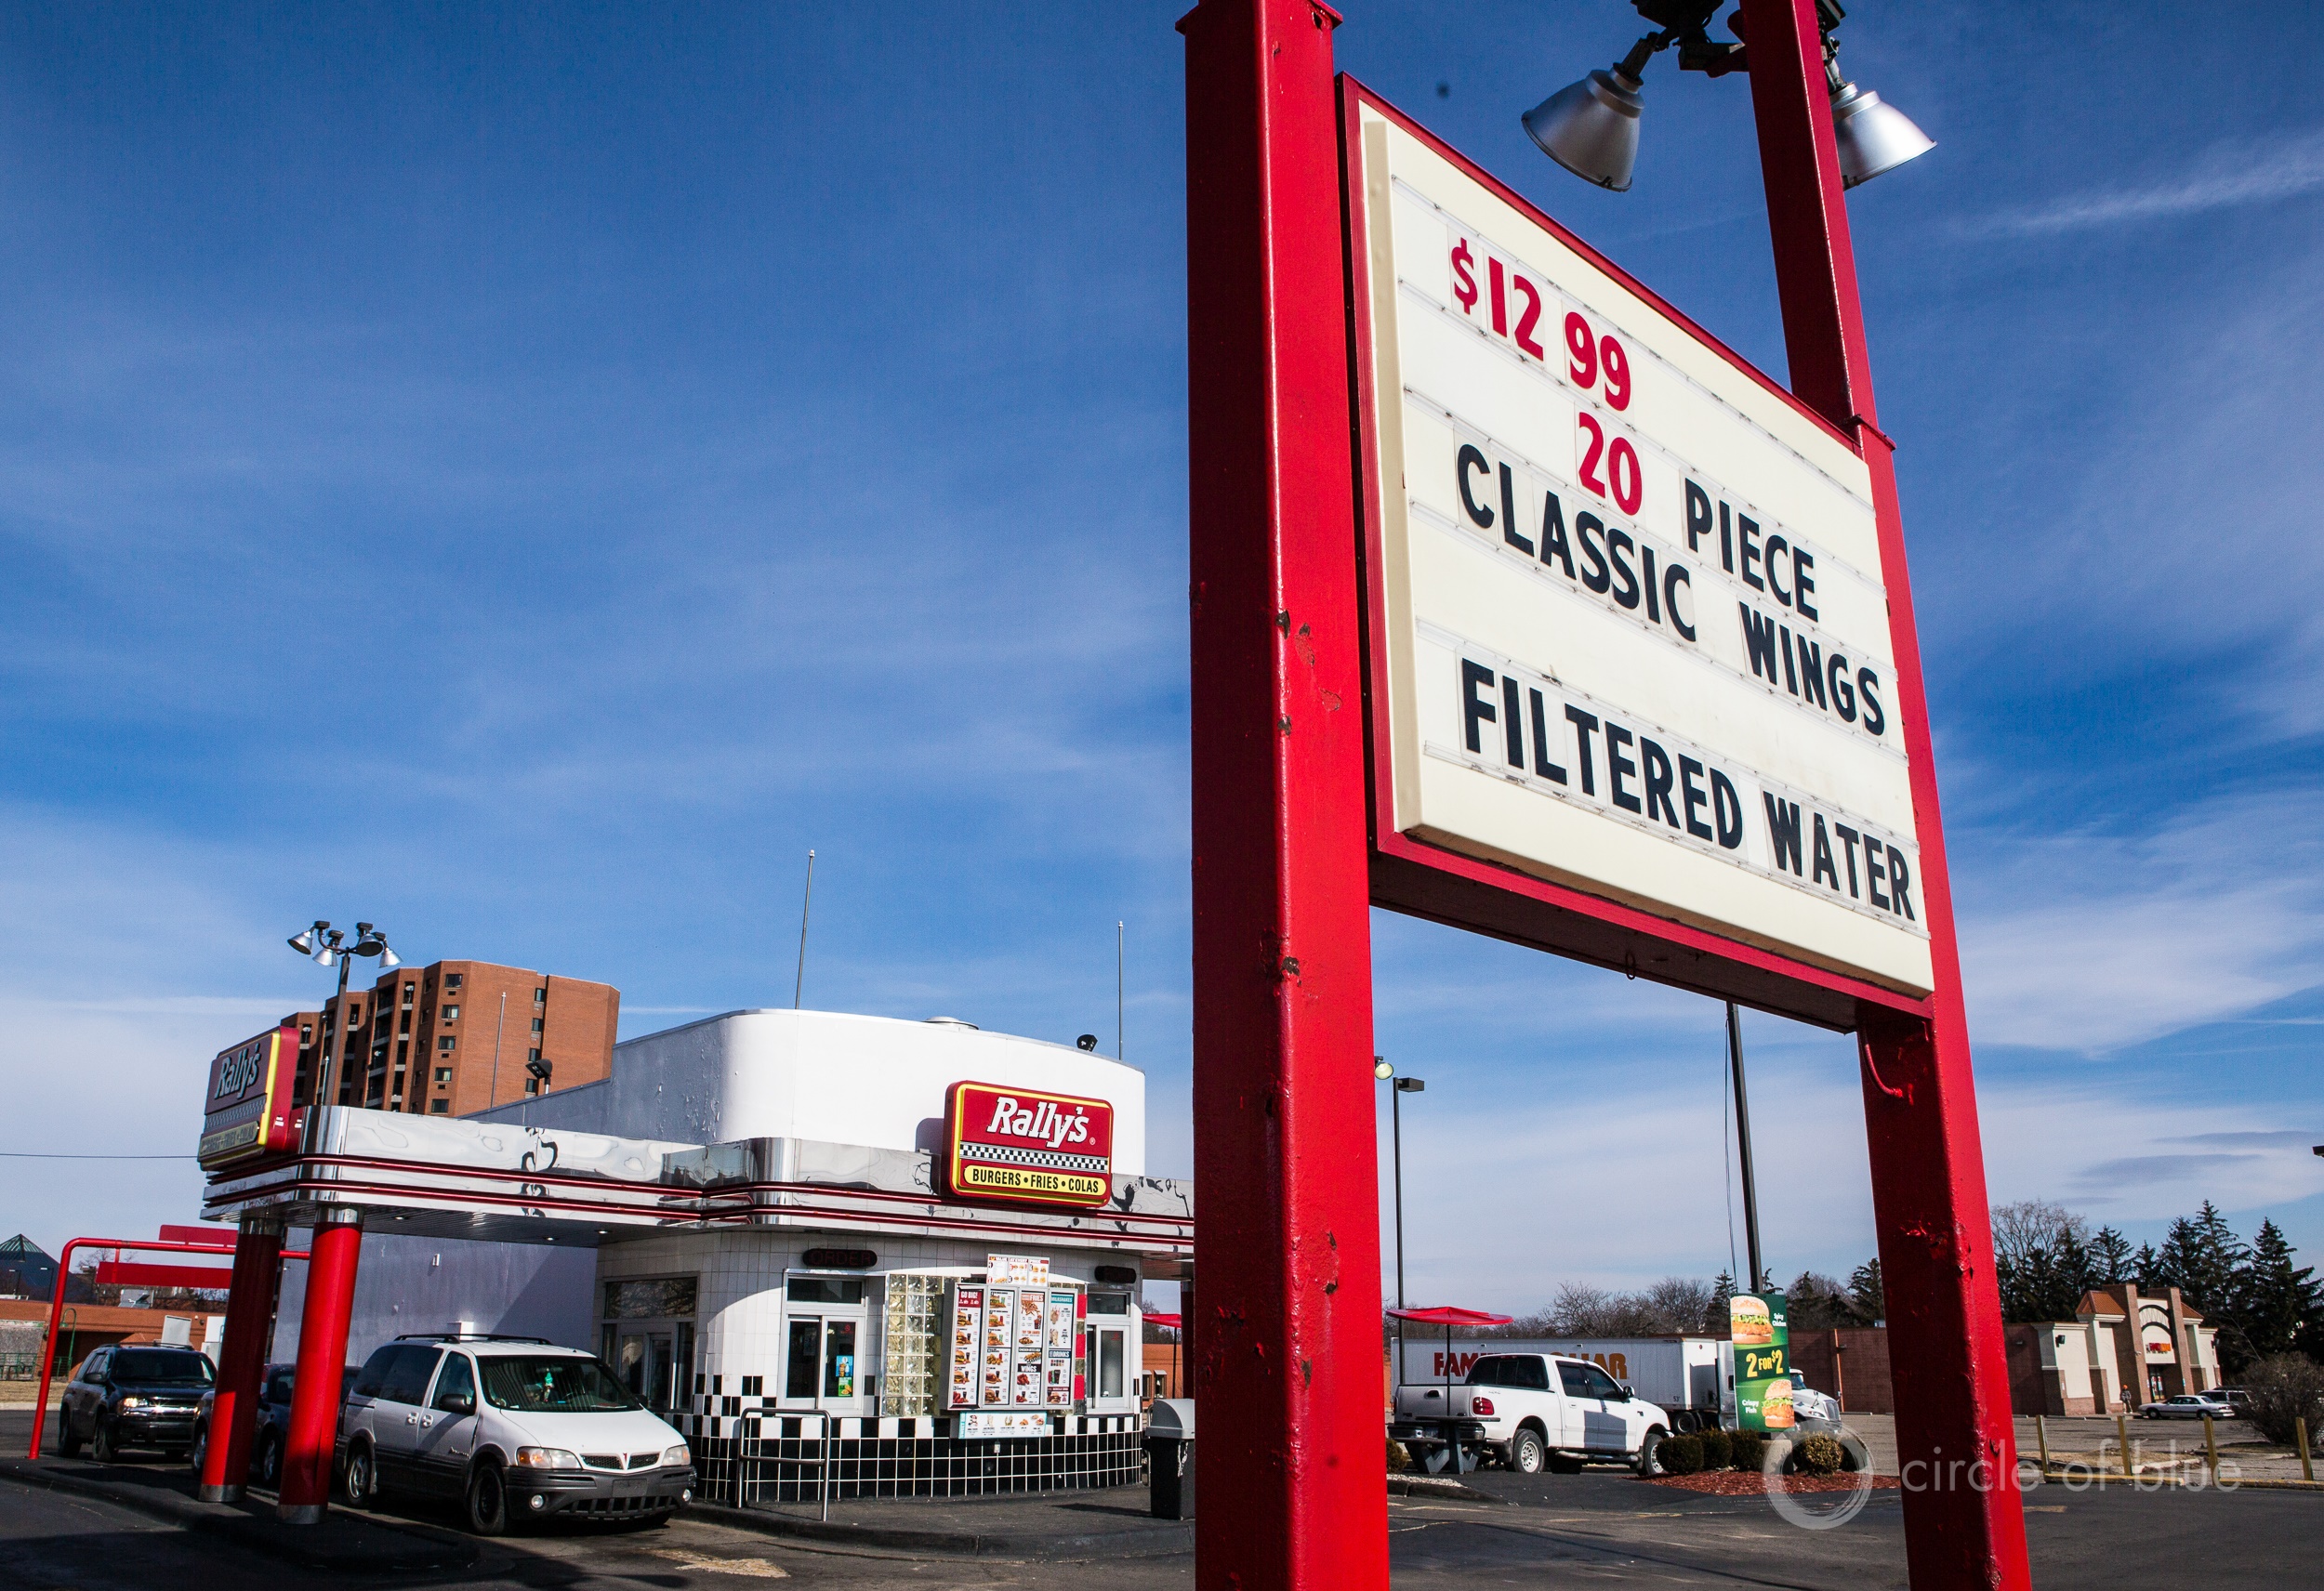 A sign at a Rally's fast food restaurant in Flint, Michigan advertises filtered water. A sensible water quality solution for individuals or businesses, water filters are a challenge for utilities to deploy. Photo © J. Carl Ganter / Circle of Blue